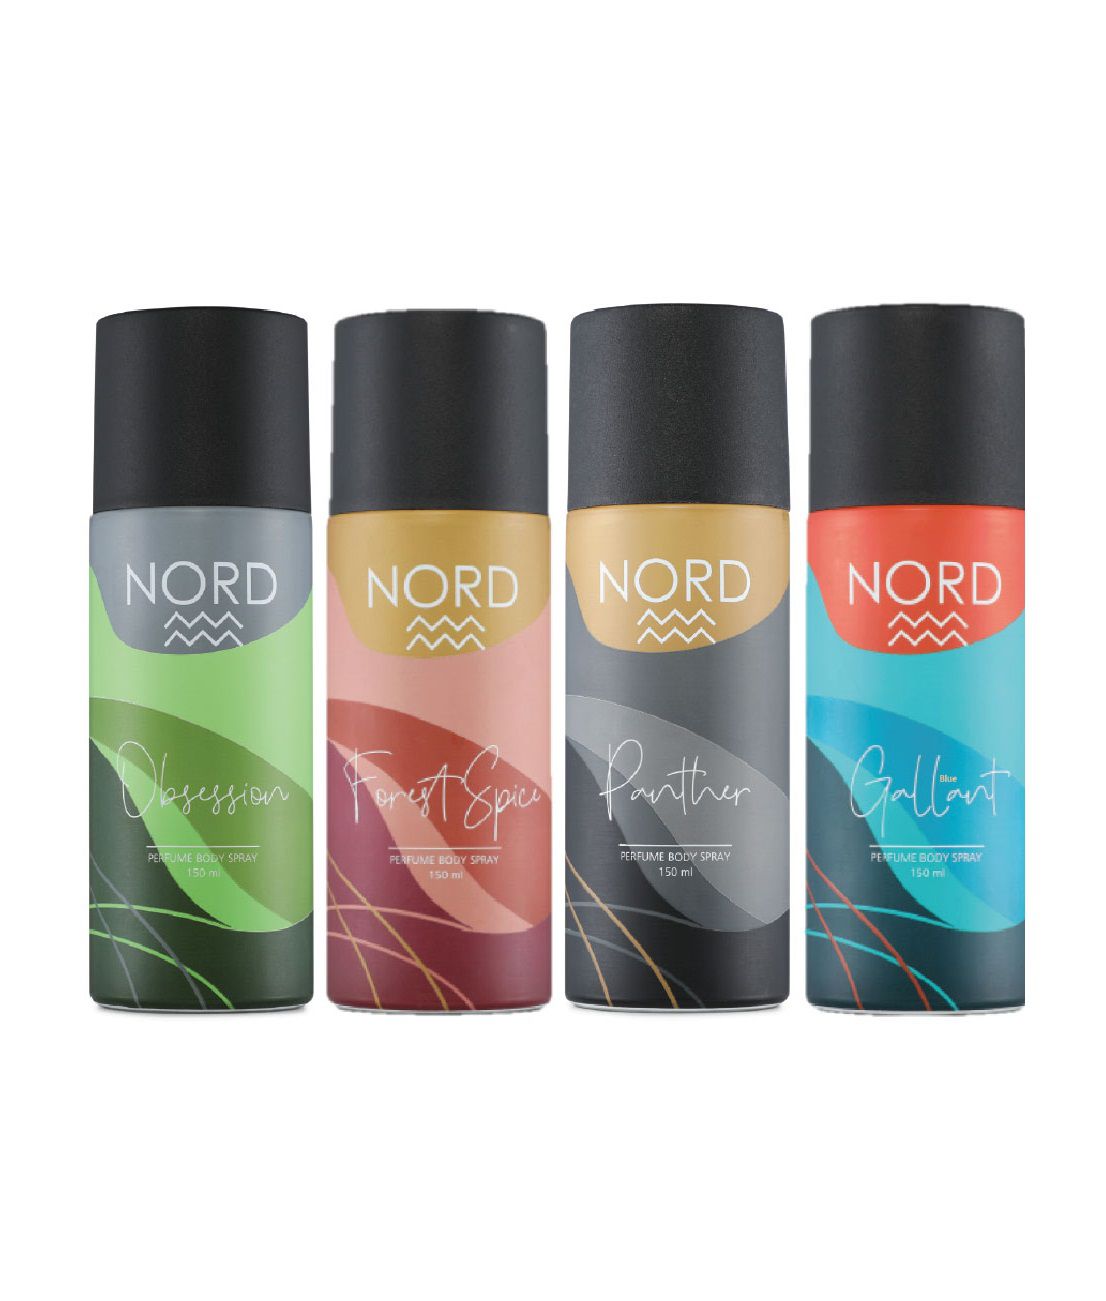     			NORD Deodorant Body Spray - Obsession, Forest Spice, Gallant and Panther 150 ml each (Pack of 4)